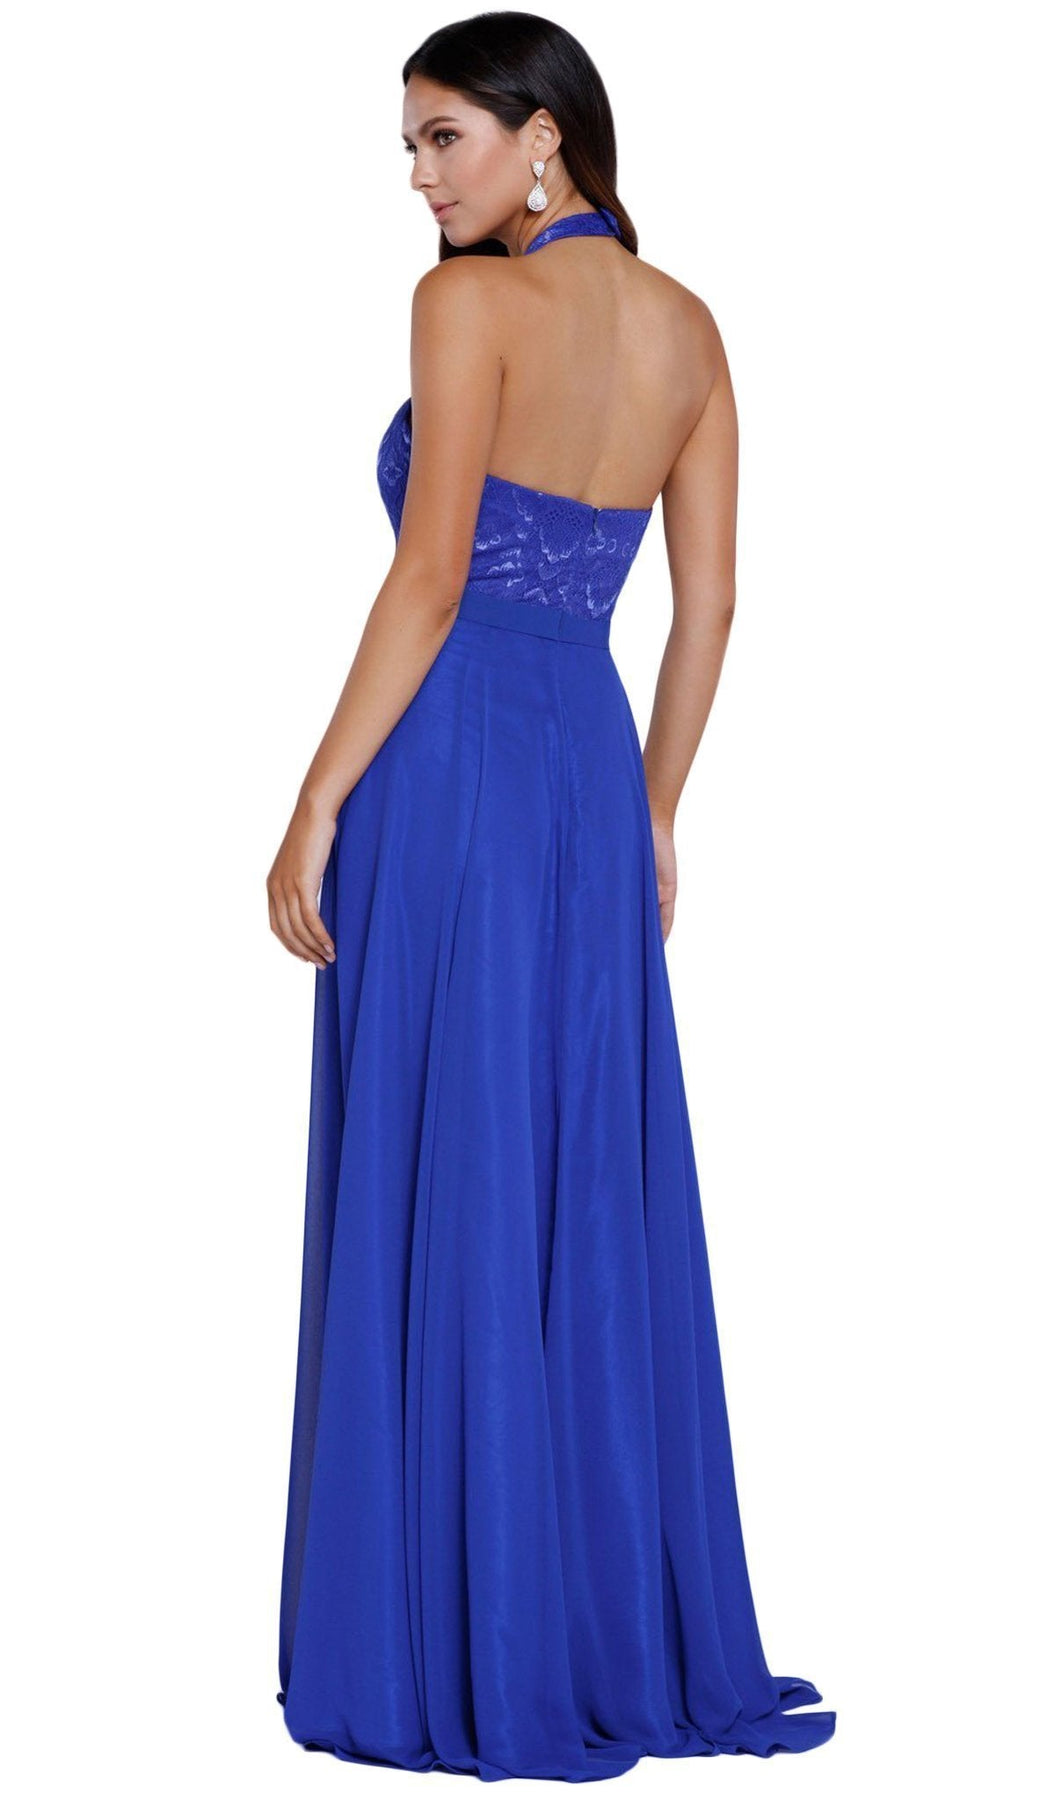 Nox Anabel - 8233 Halter Illusion Laced Bodice Long Evening Gown Special Occasion Dress S / Royal Blue